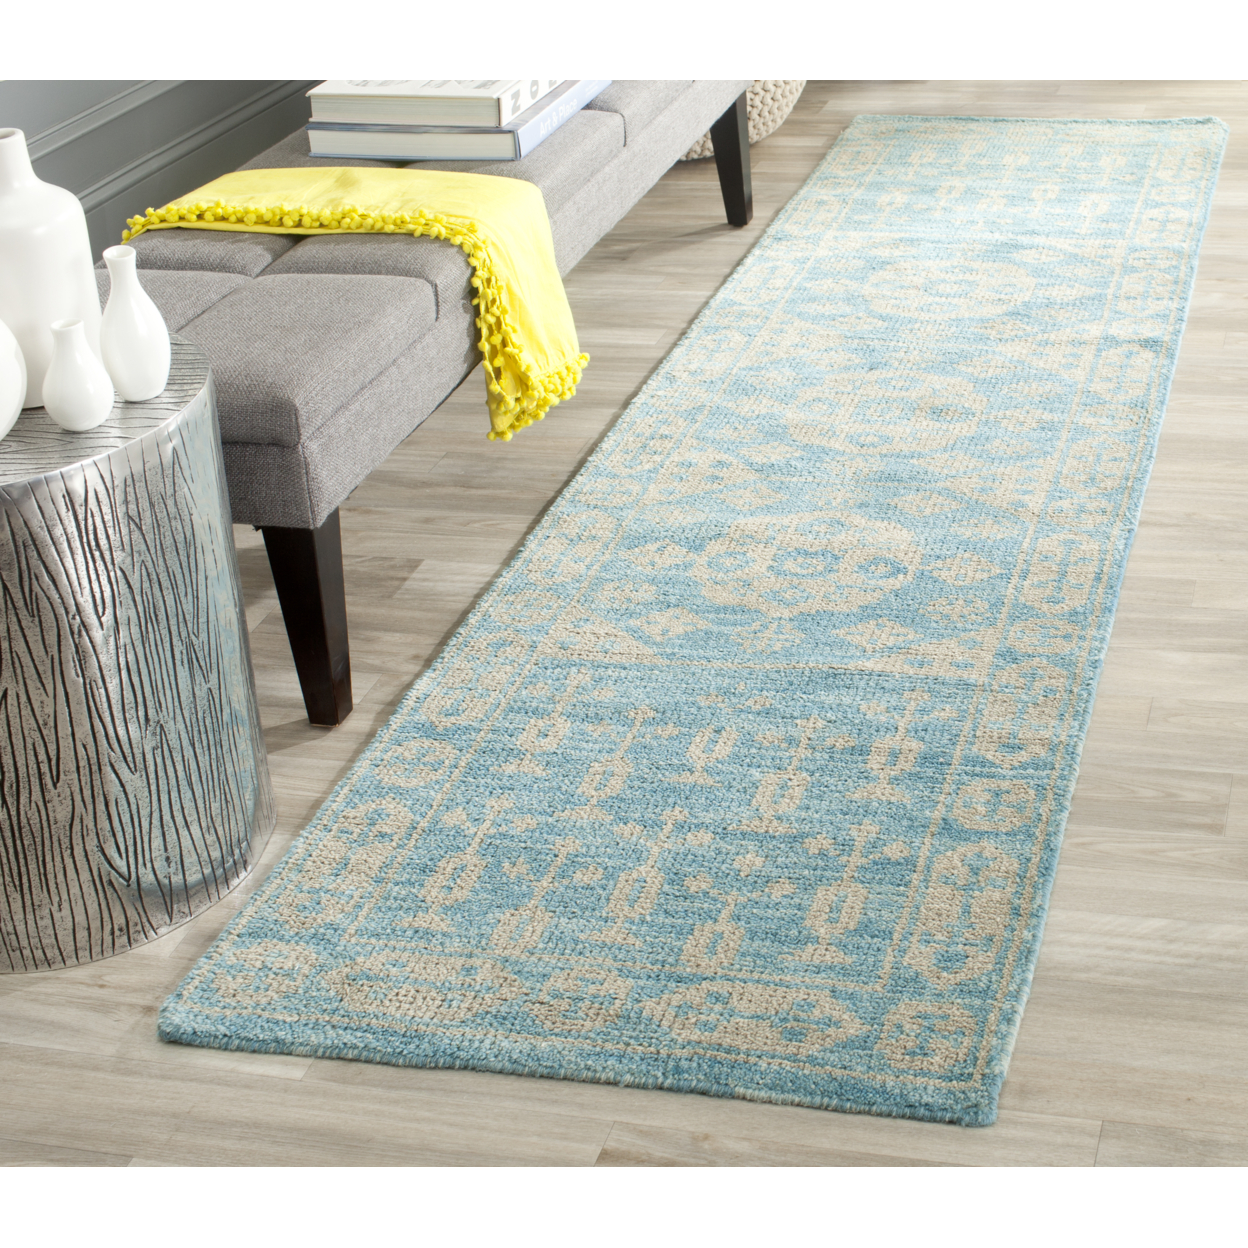 SAFAVIEH Kenya Collection KNY683A Hand-knotted Blue Rug - 7' Square